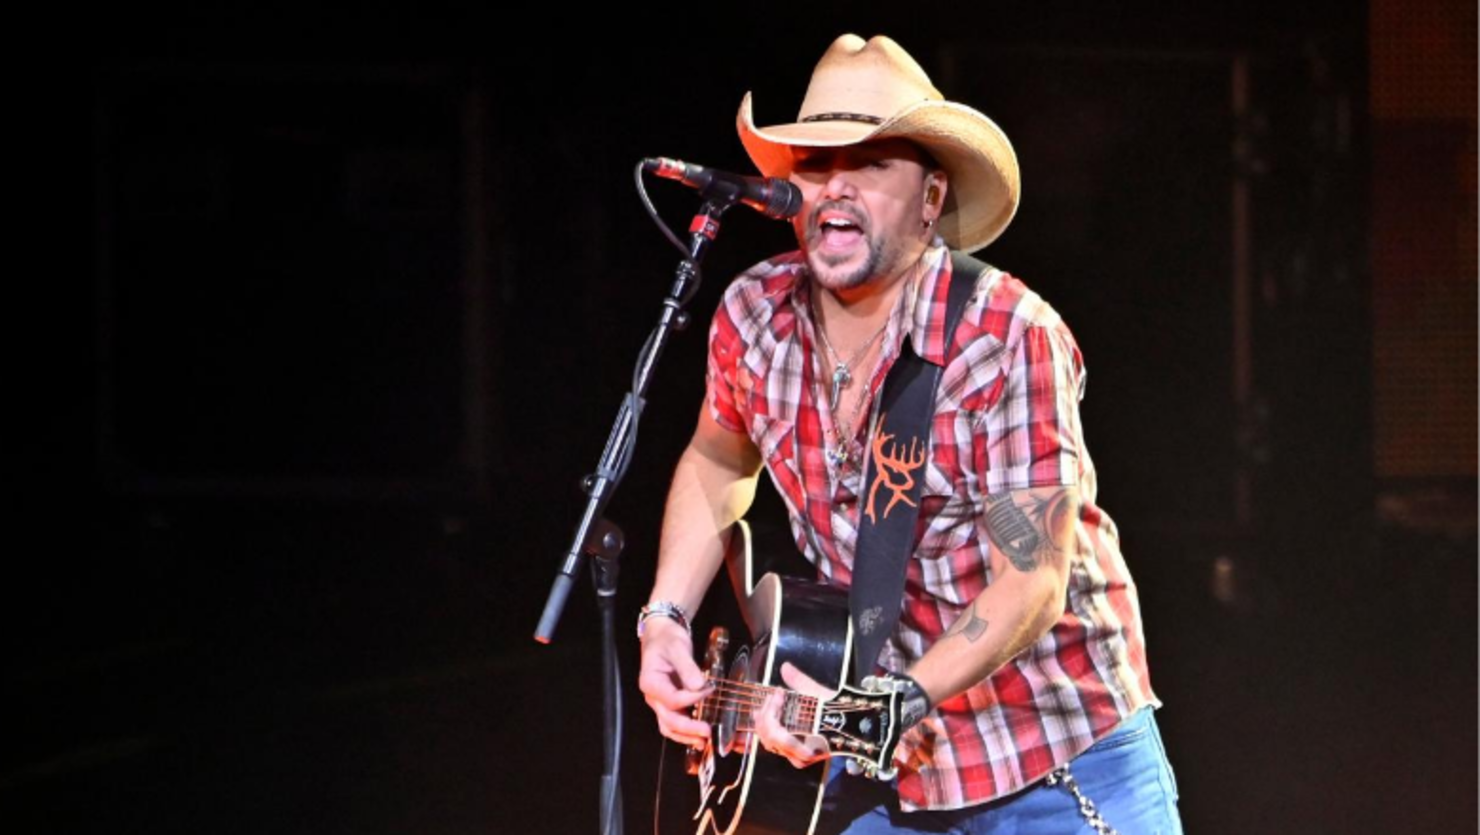 Jason Aldean To Perform Free Virtual Concert With Brett Young, Maddie & Tae